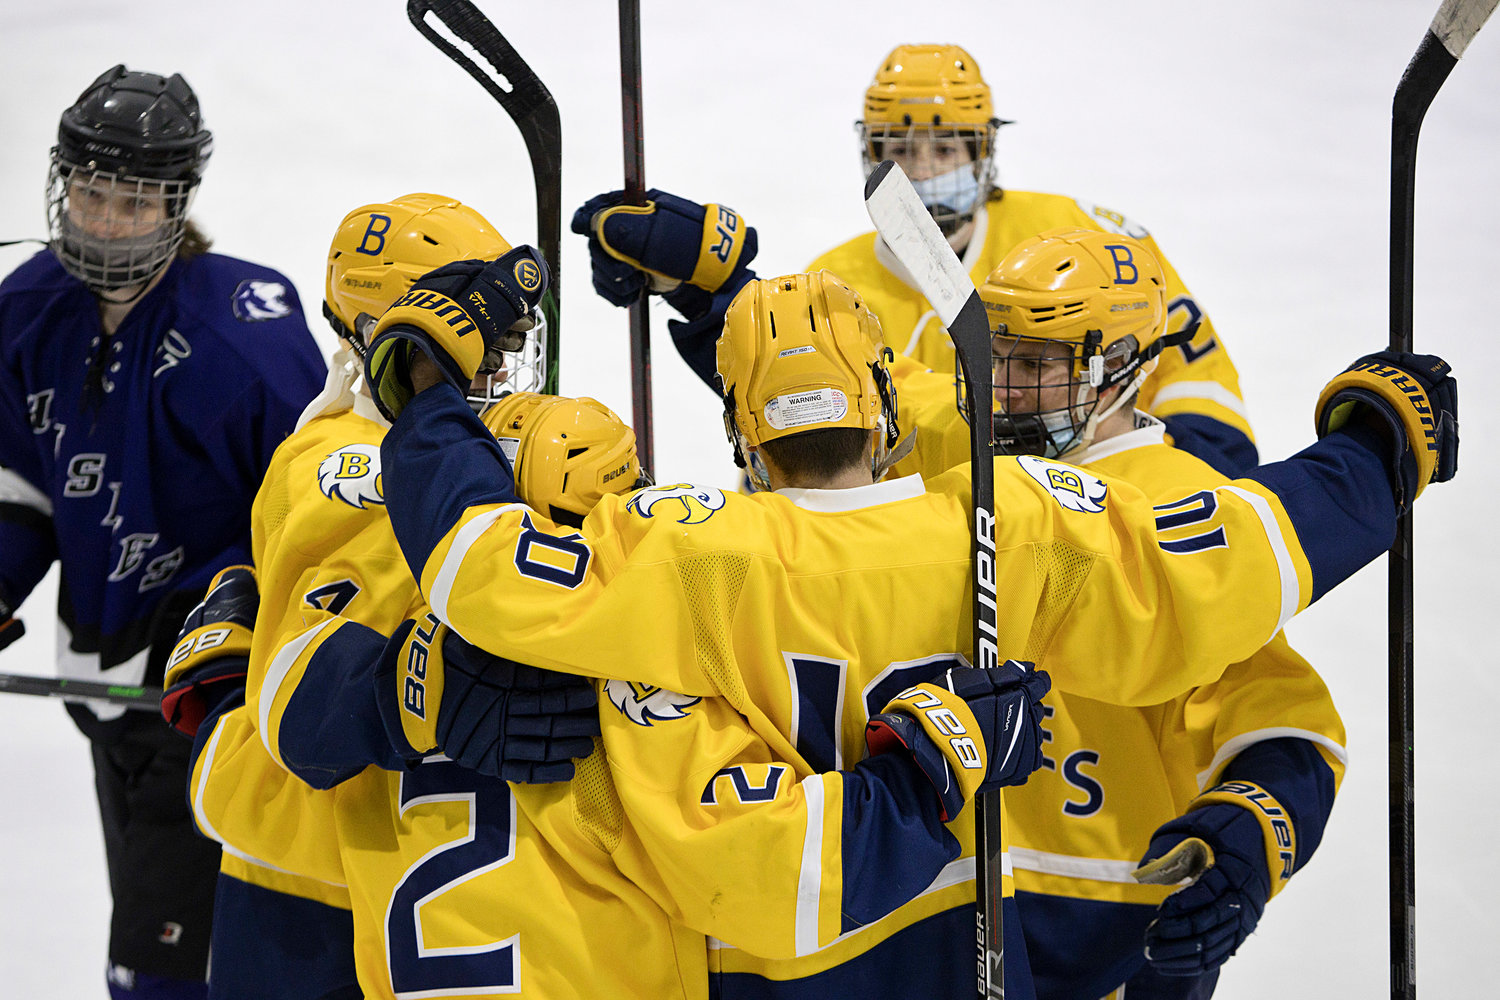 The Eagles celebrate a goal against the Huskies on Wednesday night, Jan. 5.